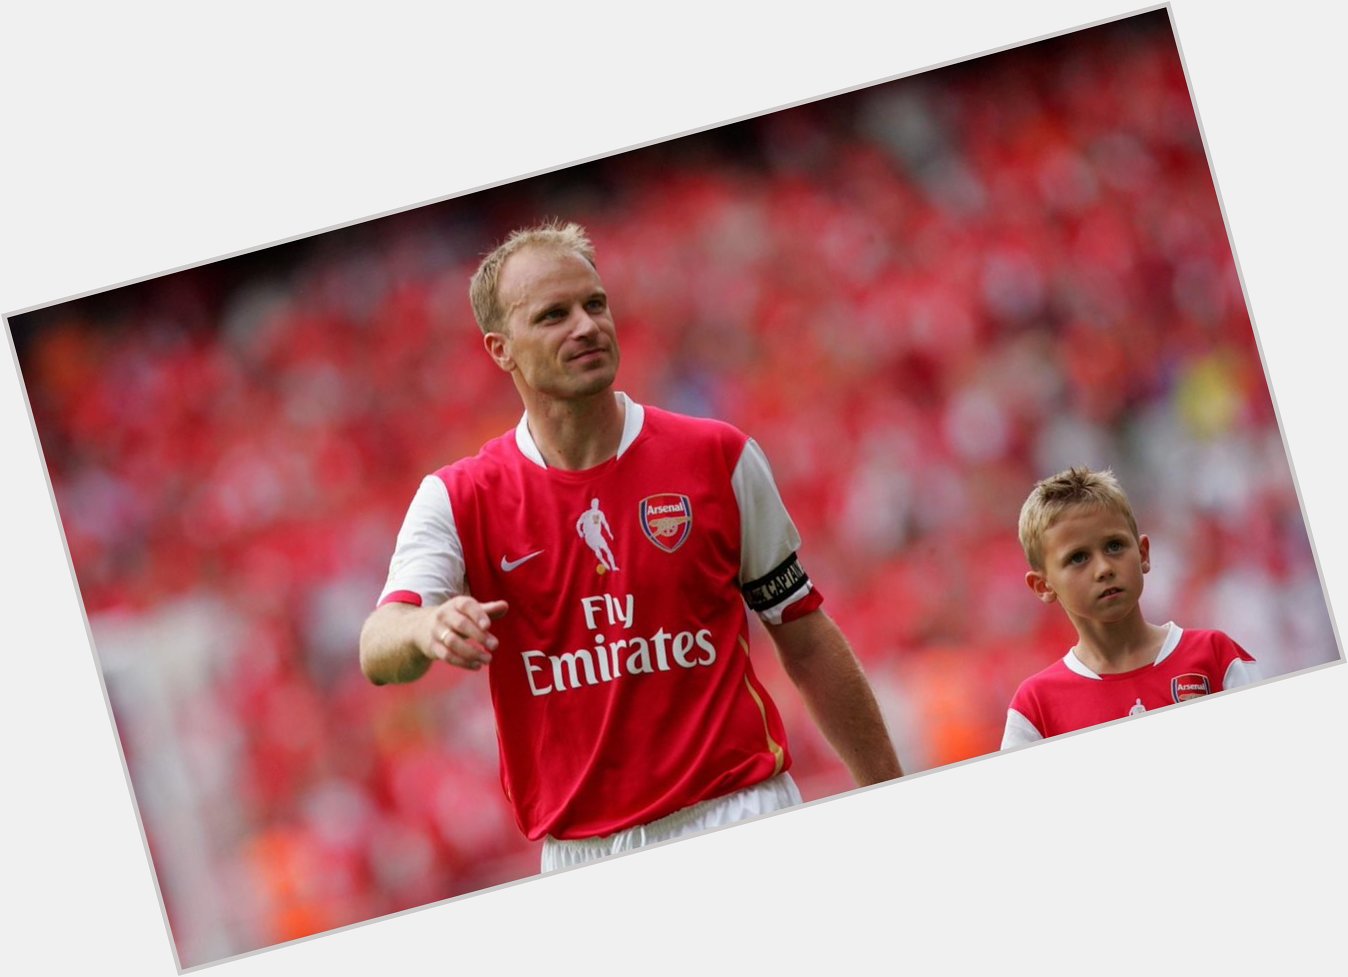 Happy birthday to Arsenal legend and Invincible Dennis Bergkamp, who turns 48 today! 